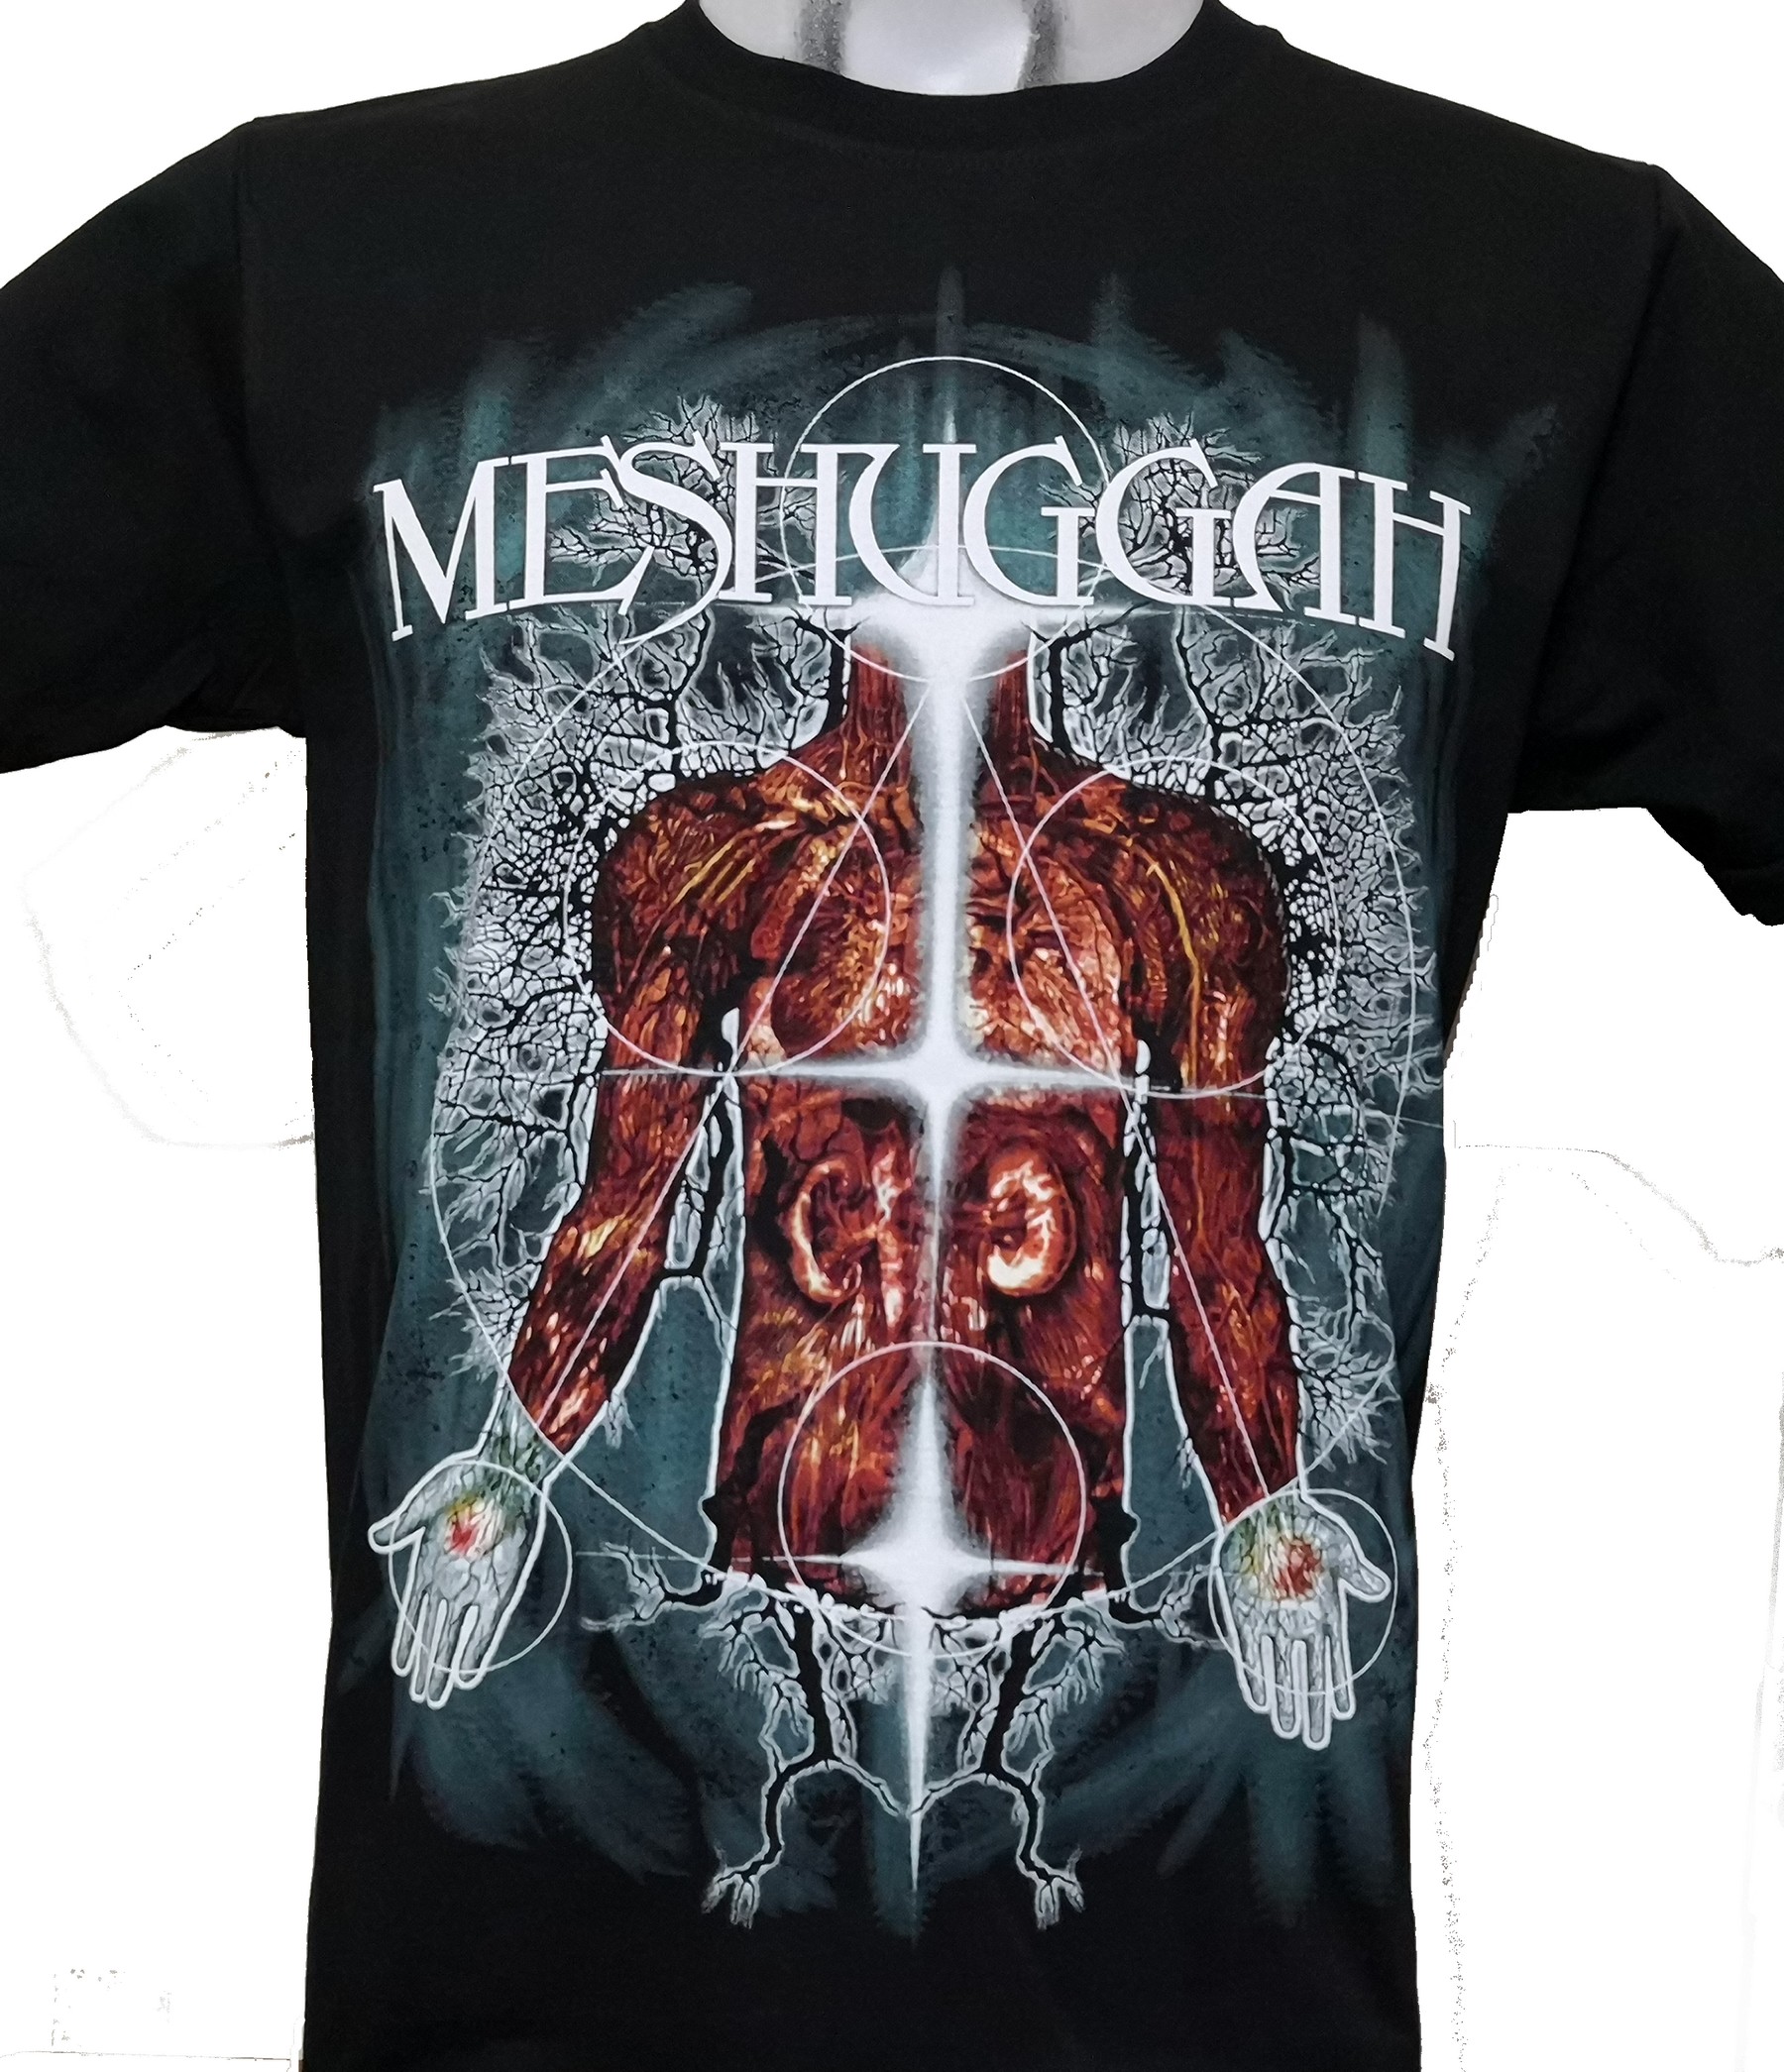 Details about   RARE! LIMITED 6449-Meshuggah T SHIRT Size S-2XL 